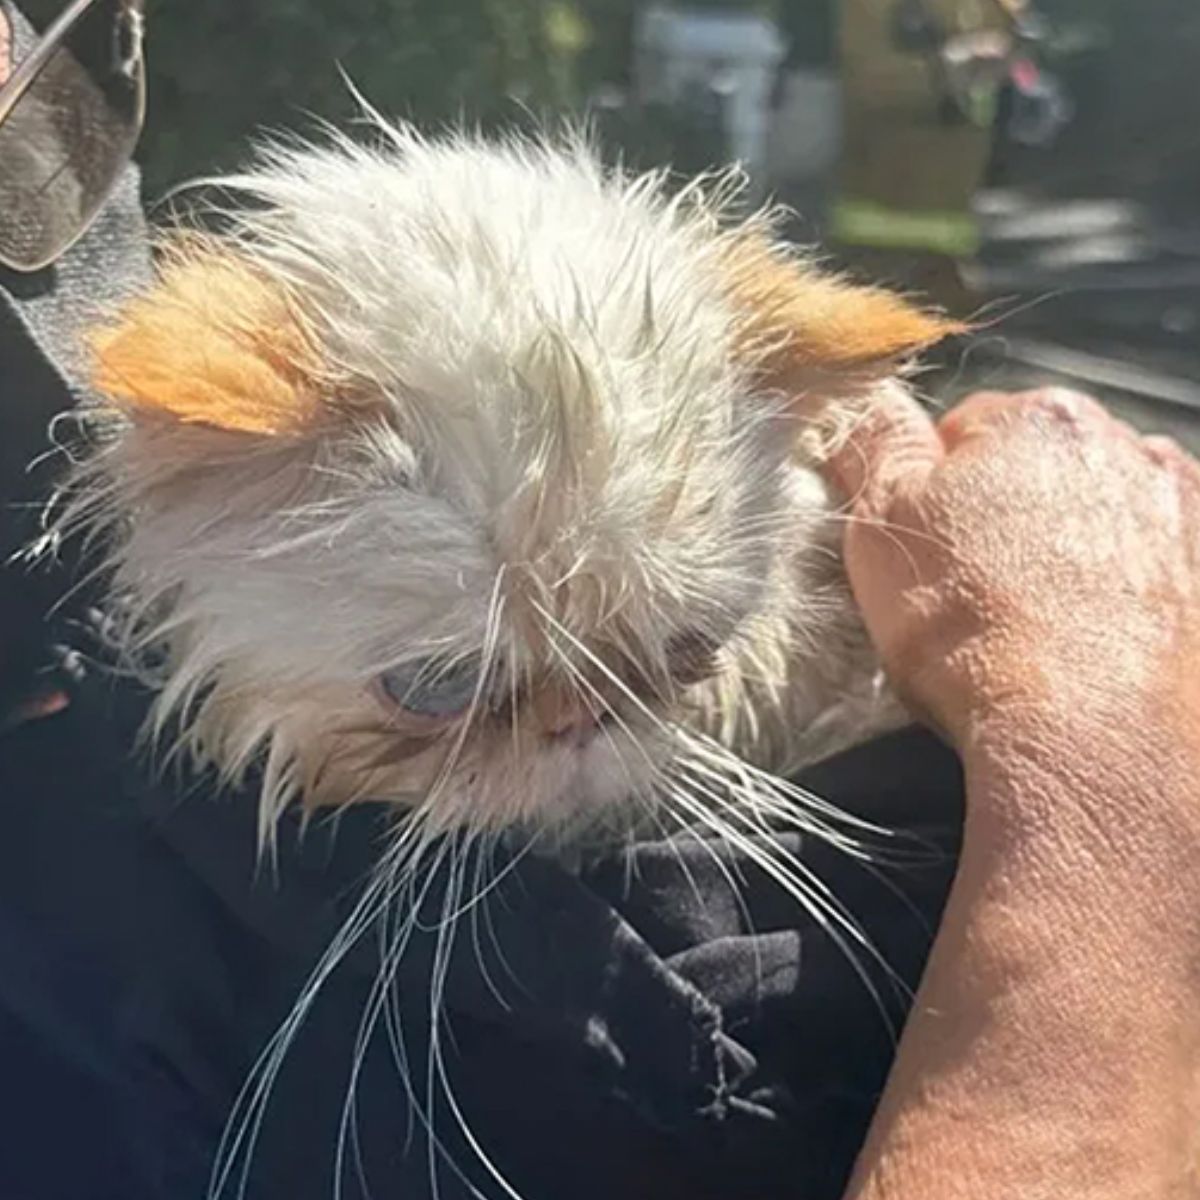 close-up photo of rescued cat